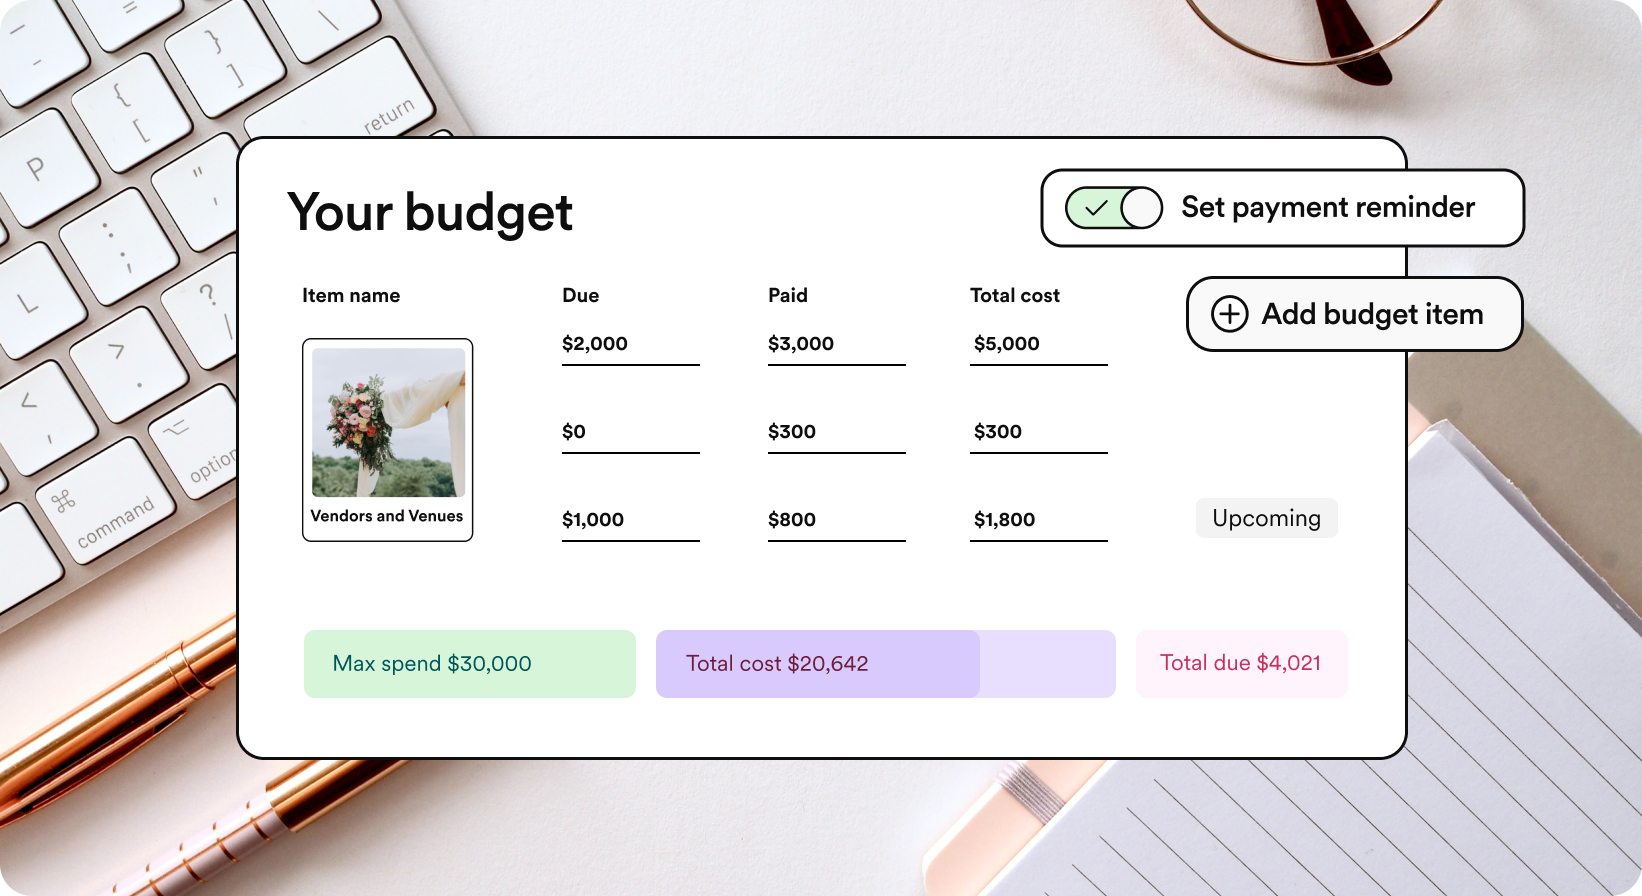 Free Wedding Budget Planner and Calculator Tool - Zola